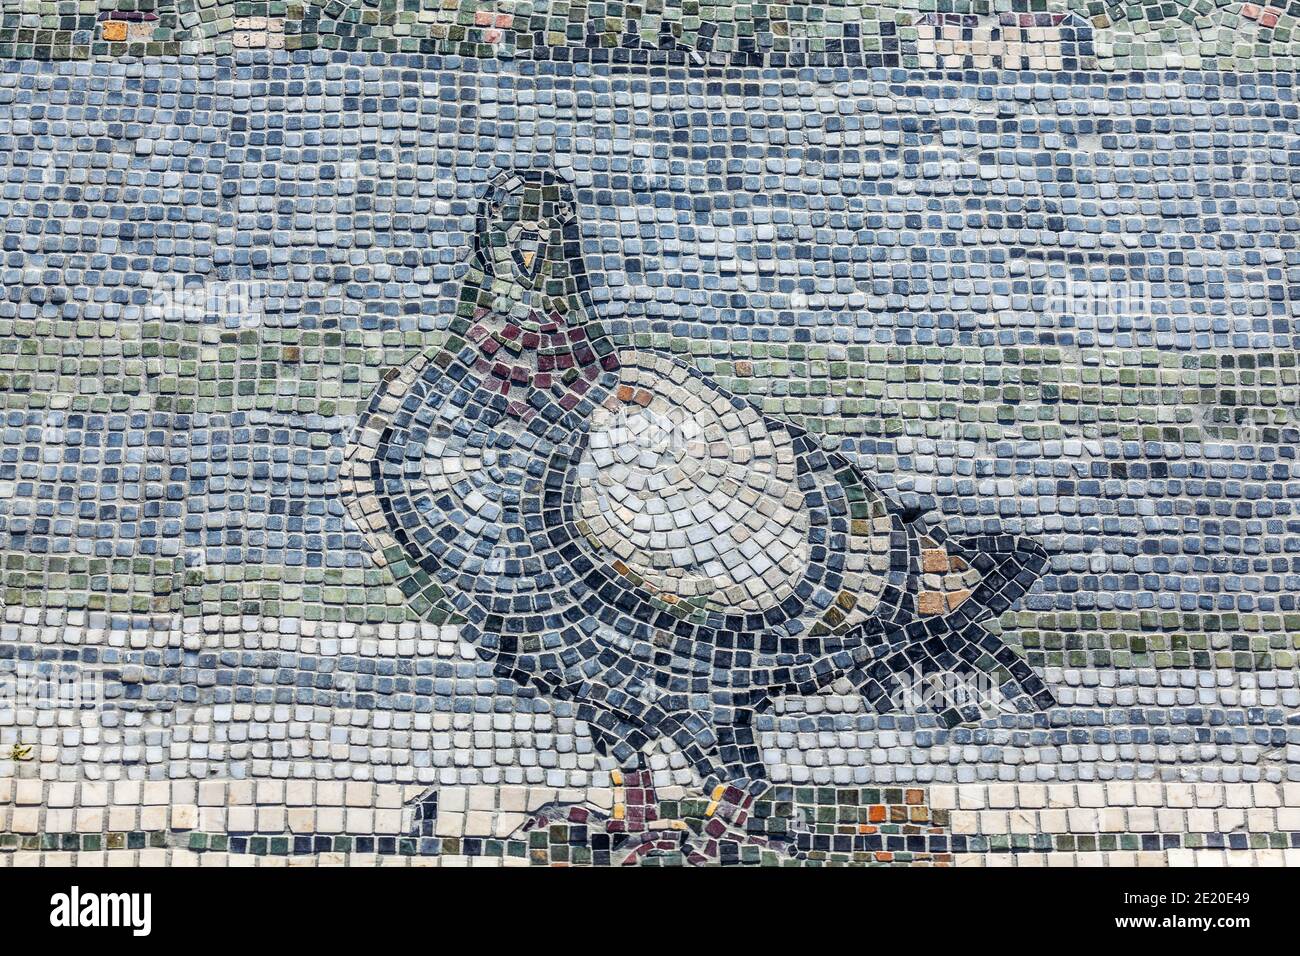 Istanbul, Turkey - 08.14.2012: Detail from the side mosaics of the large fountain pool located in the park between Sultanahmet and Hagia Sophia: Pigeo Stock Photo